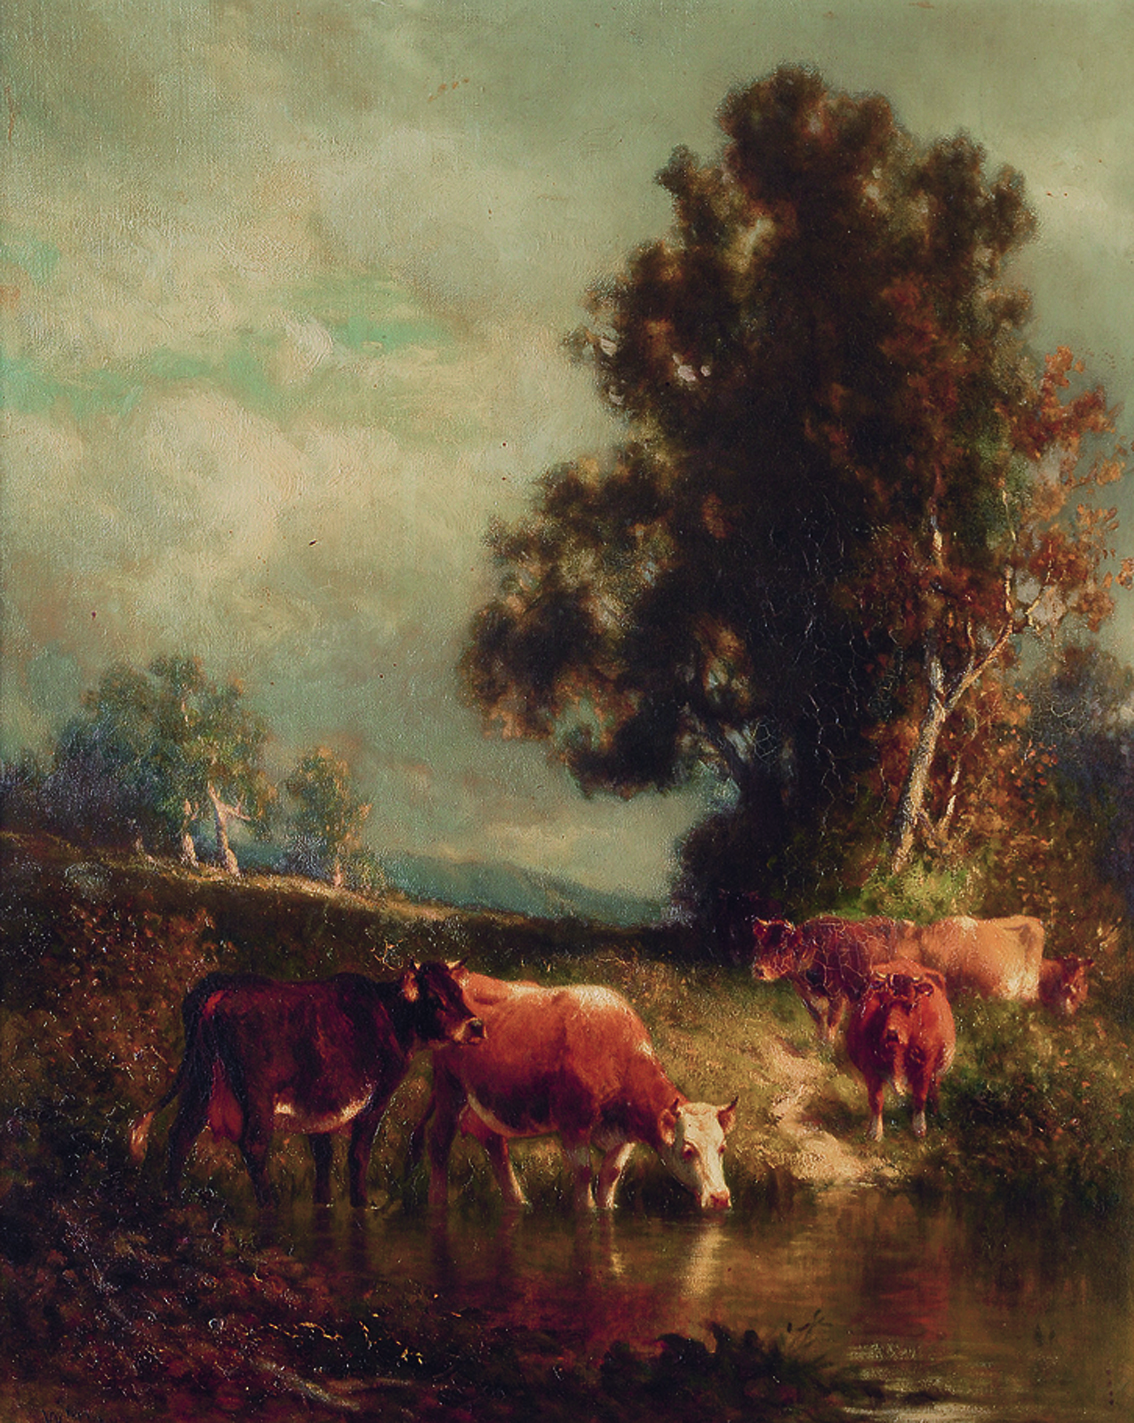 Cows near the water